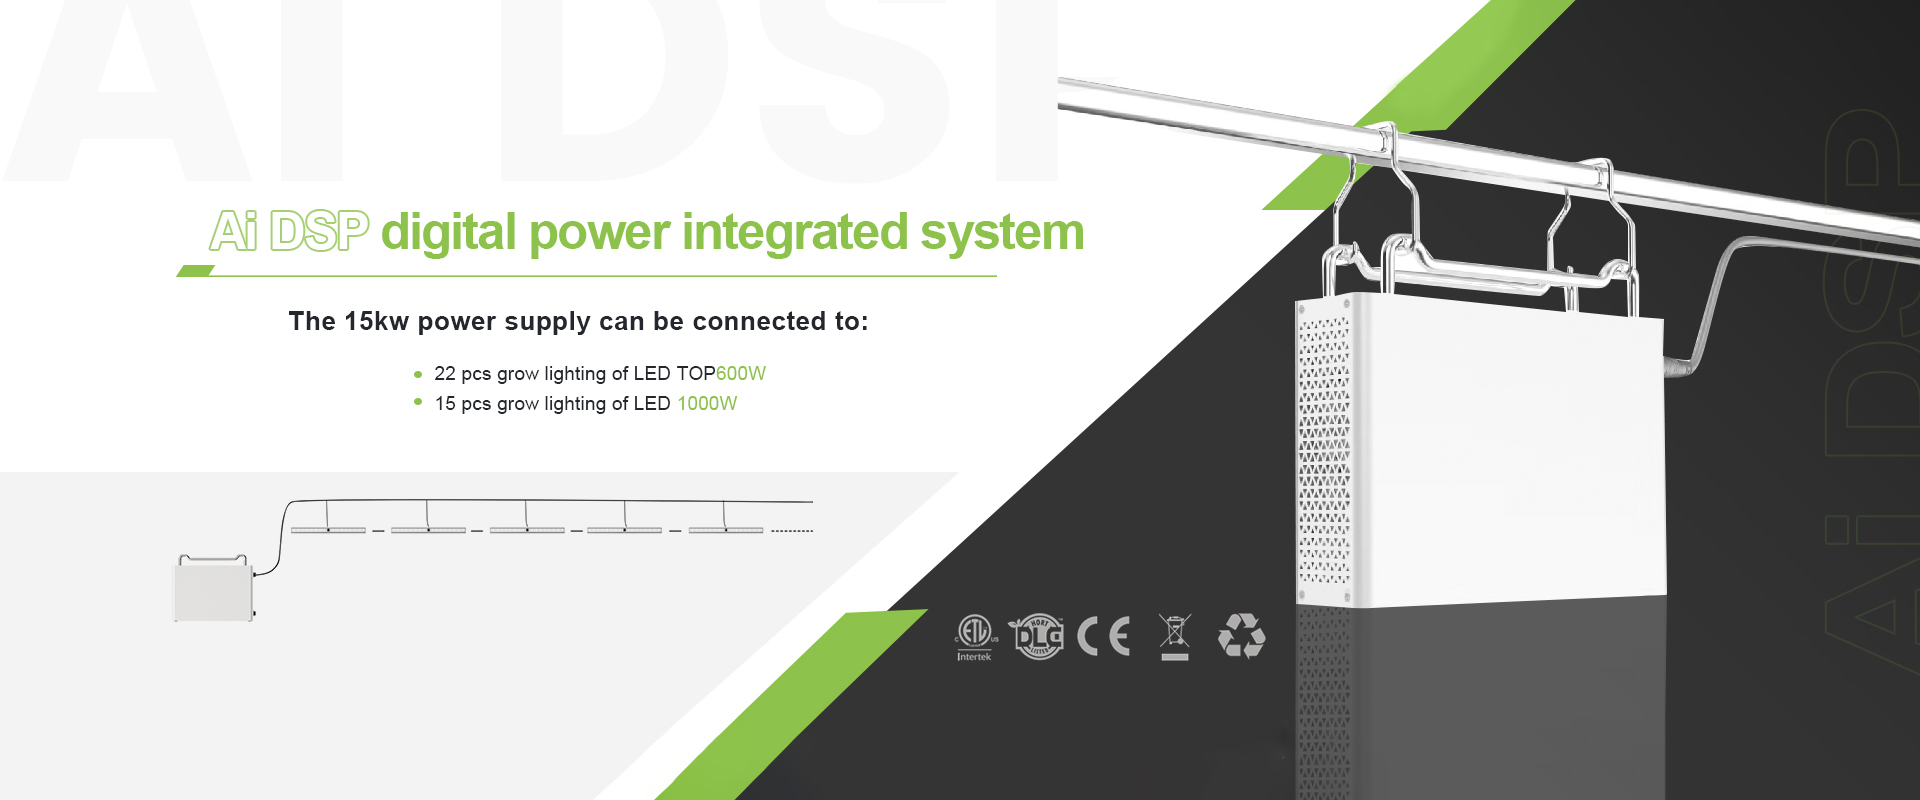 Ai DSP digital power integrated system